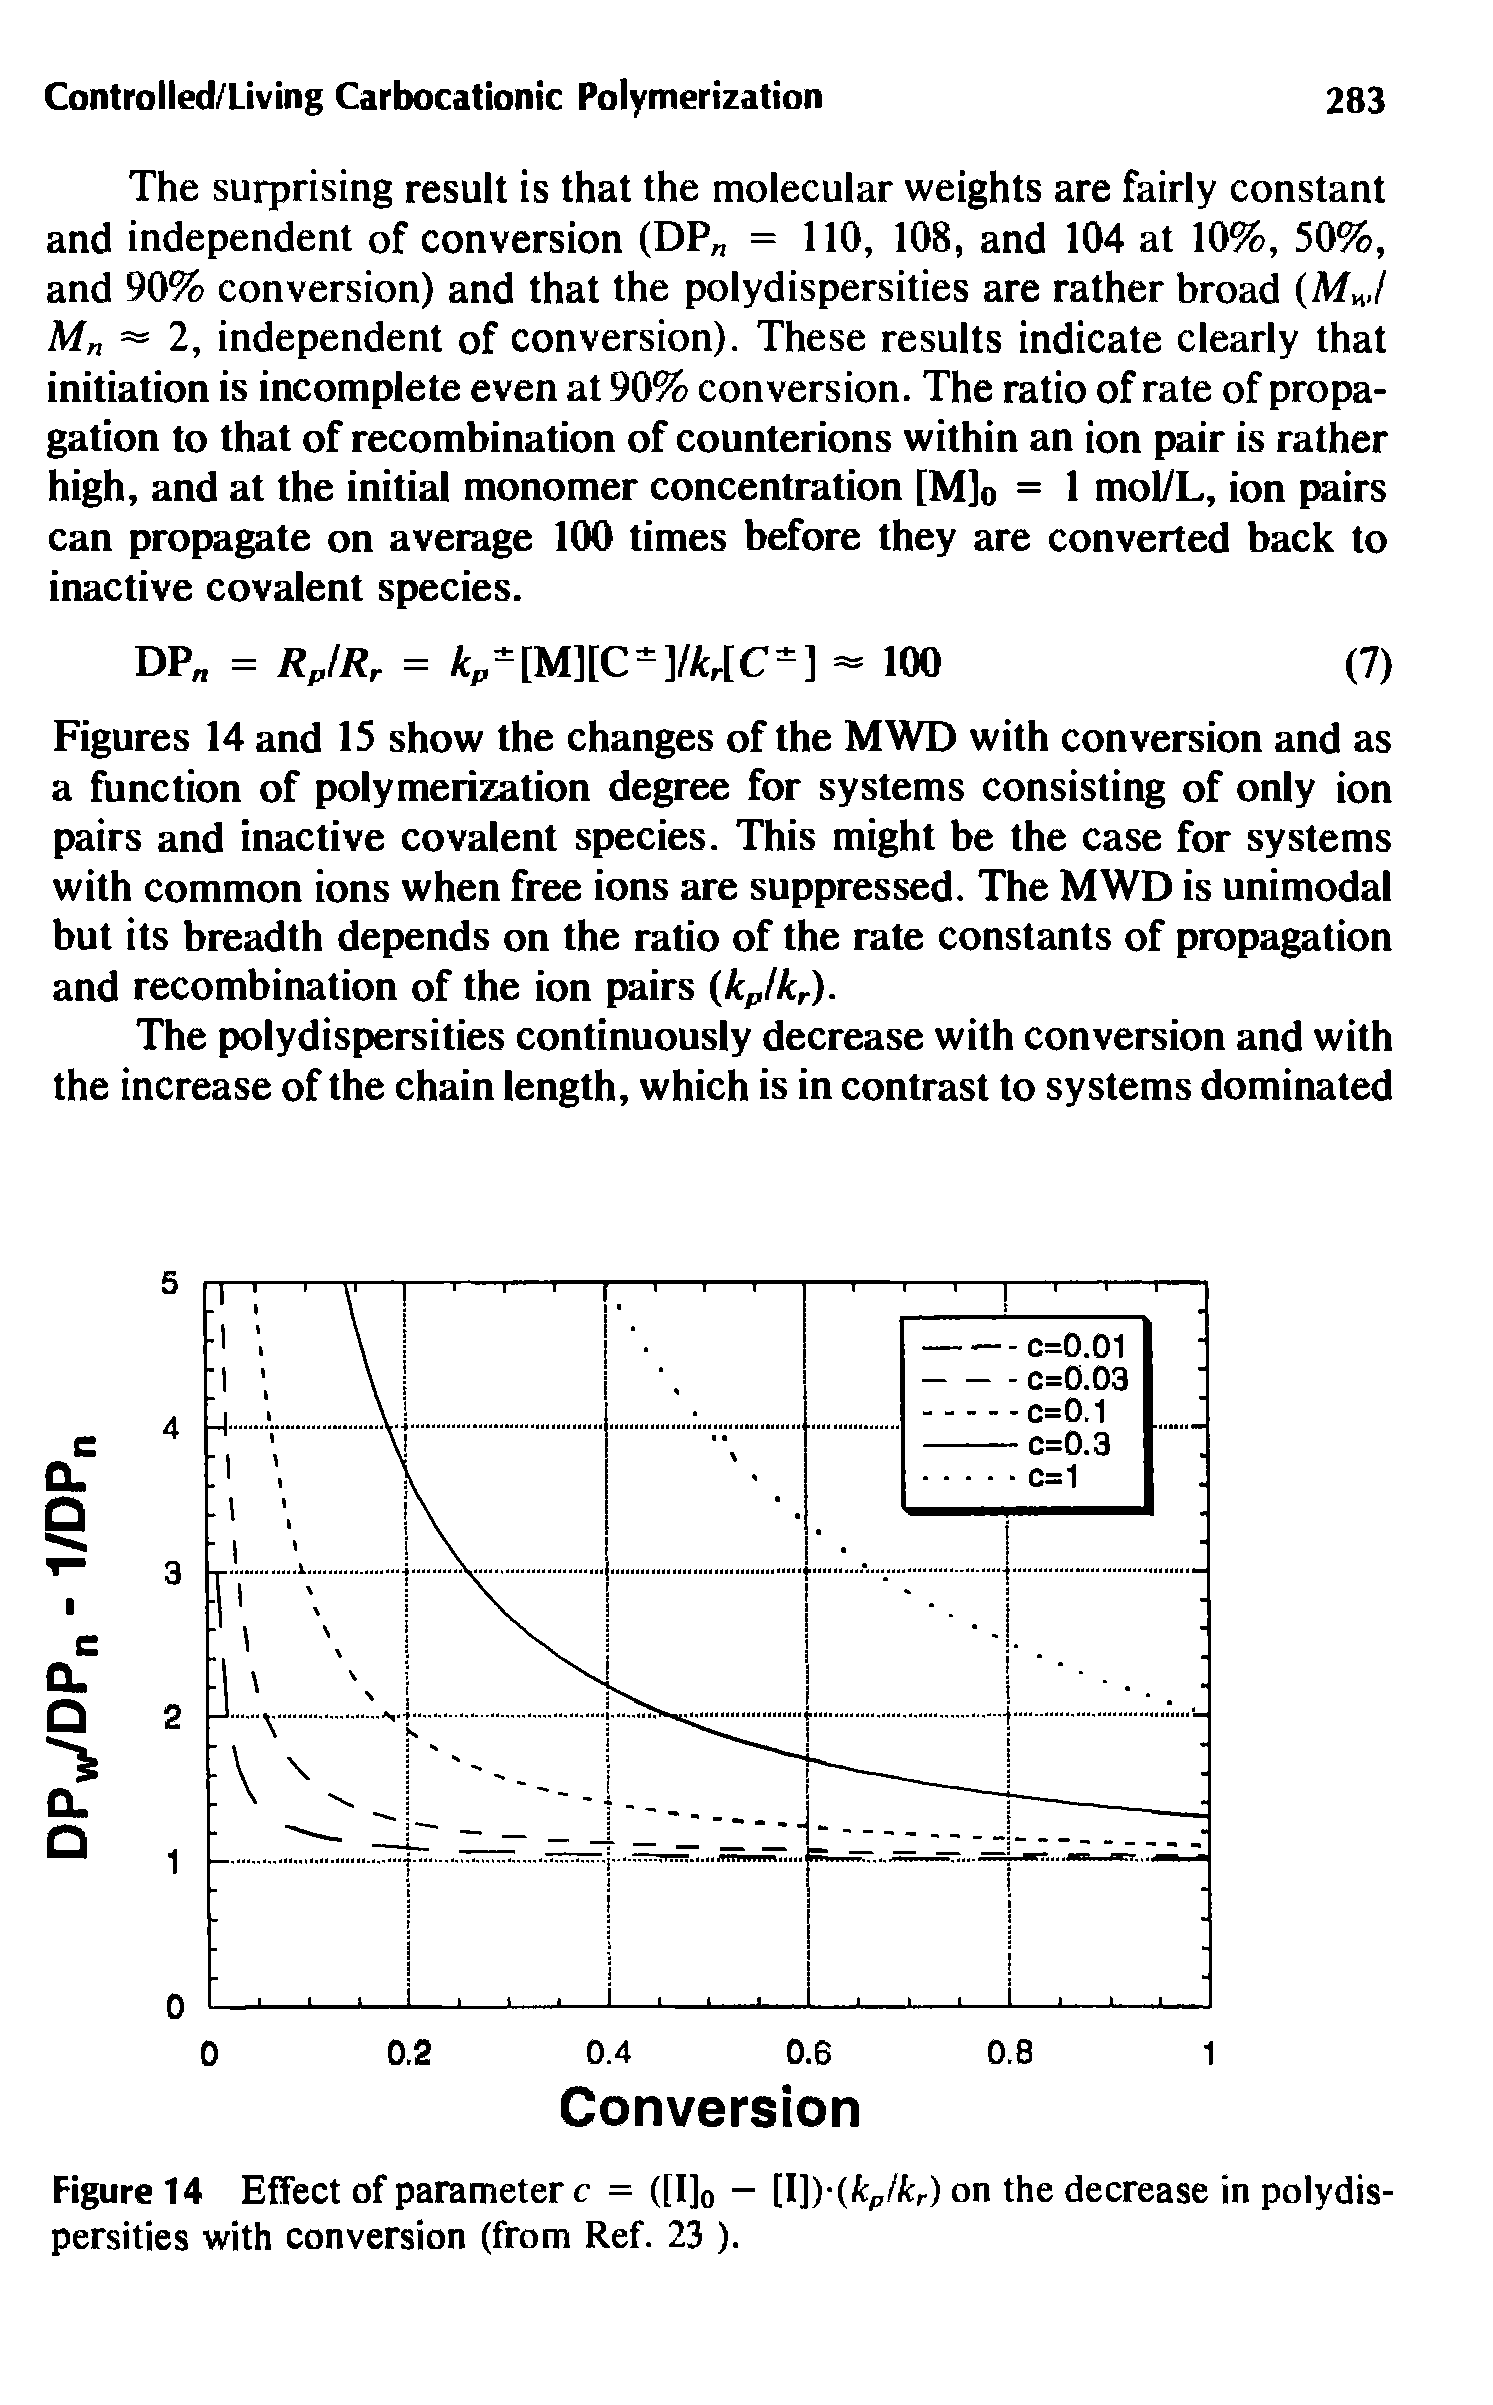 Figure 14 Effect of parameter c = ([I]0 - [I])-(fcp/fcr) on the decrease in polydispersities with conversion (from Ref. 23 ).